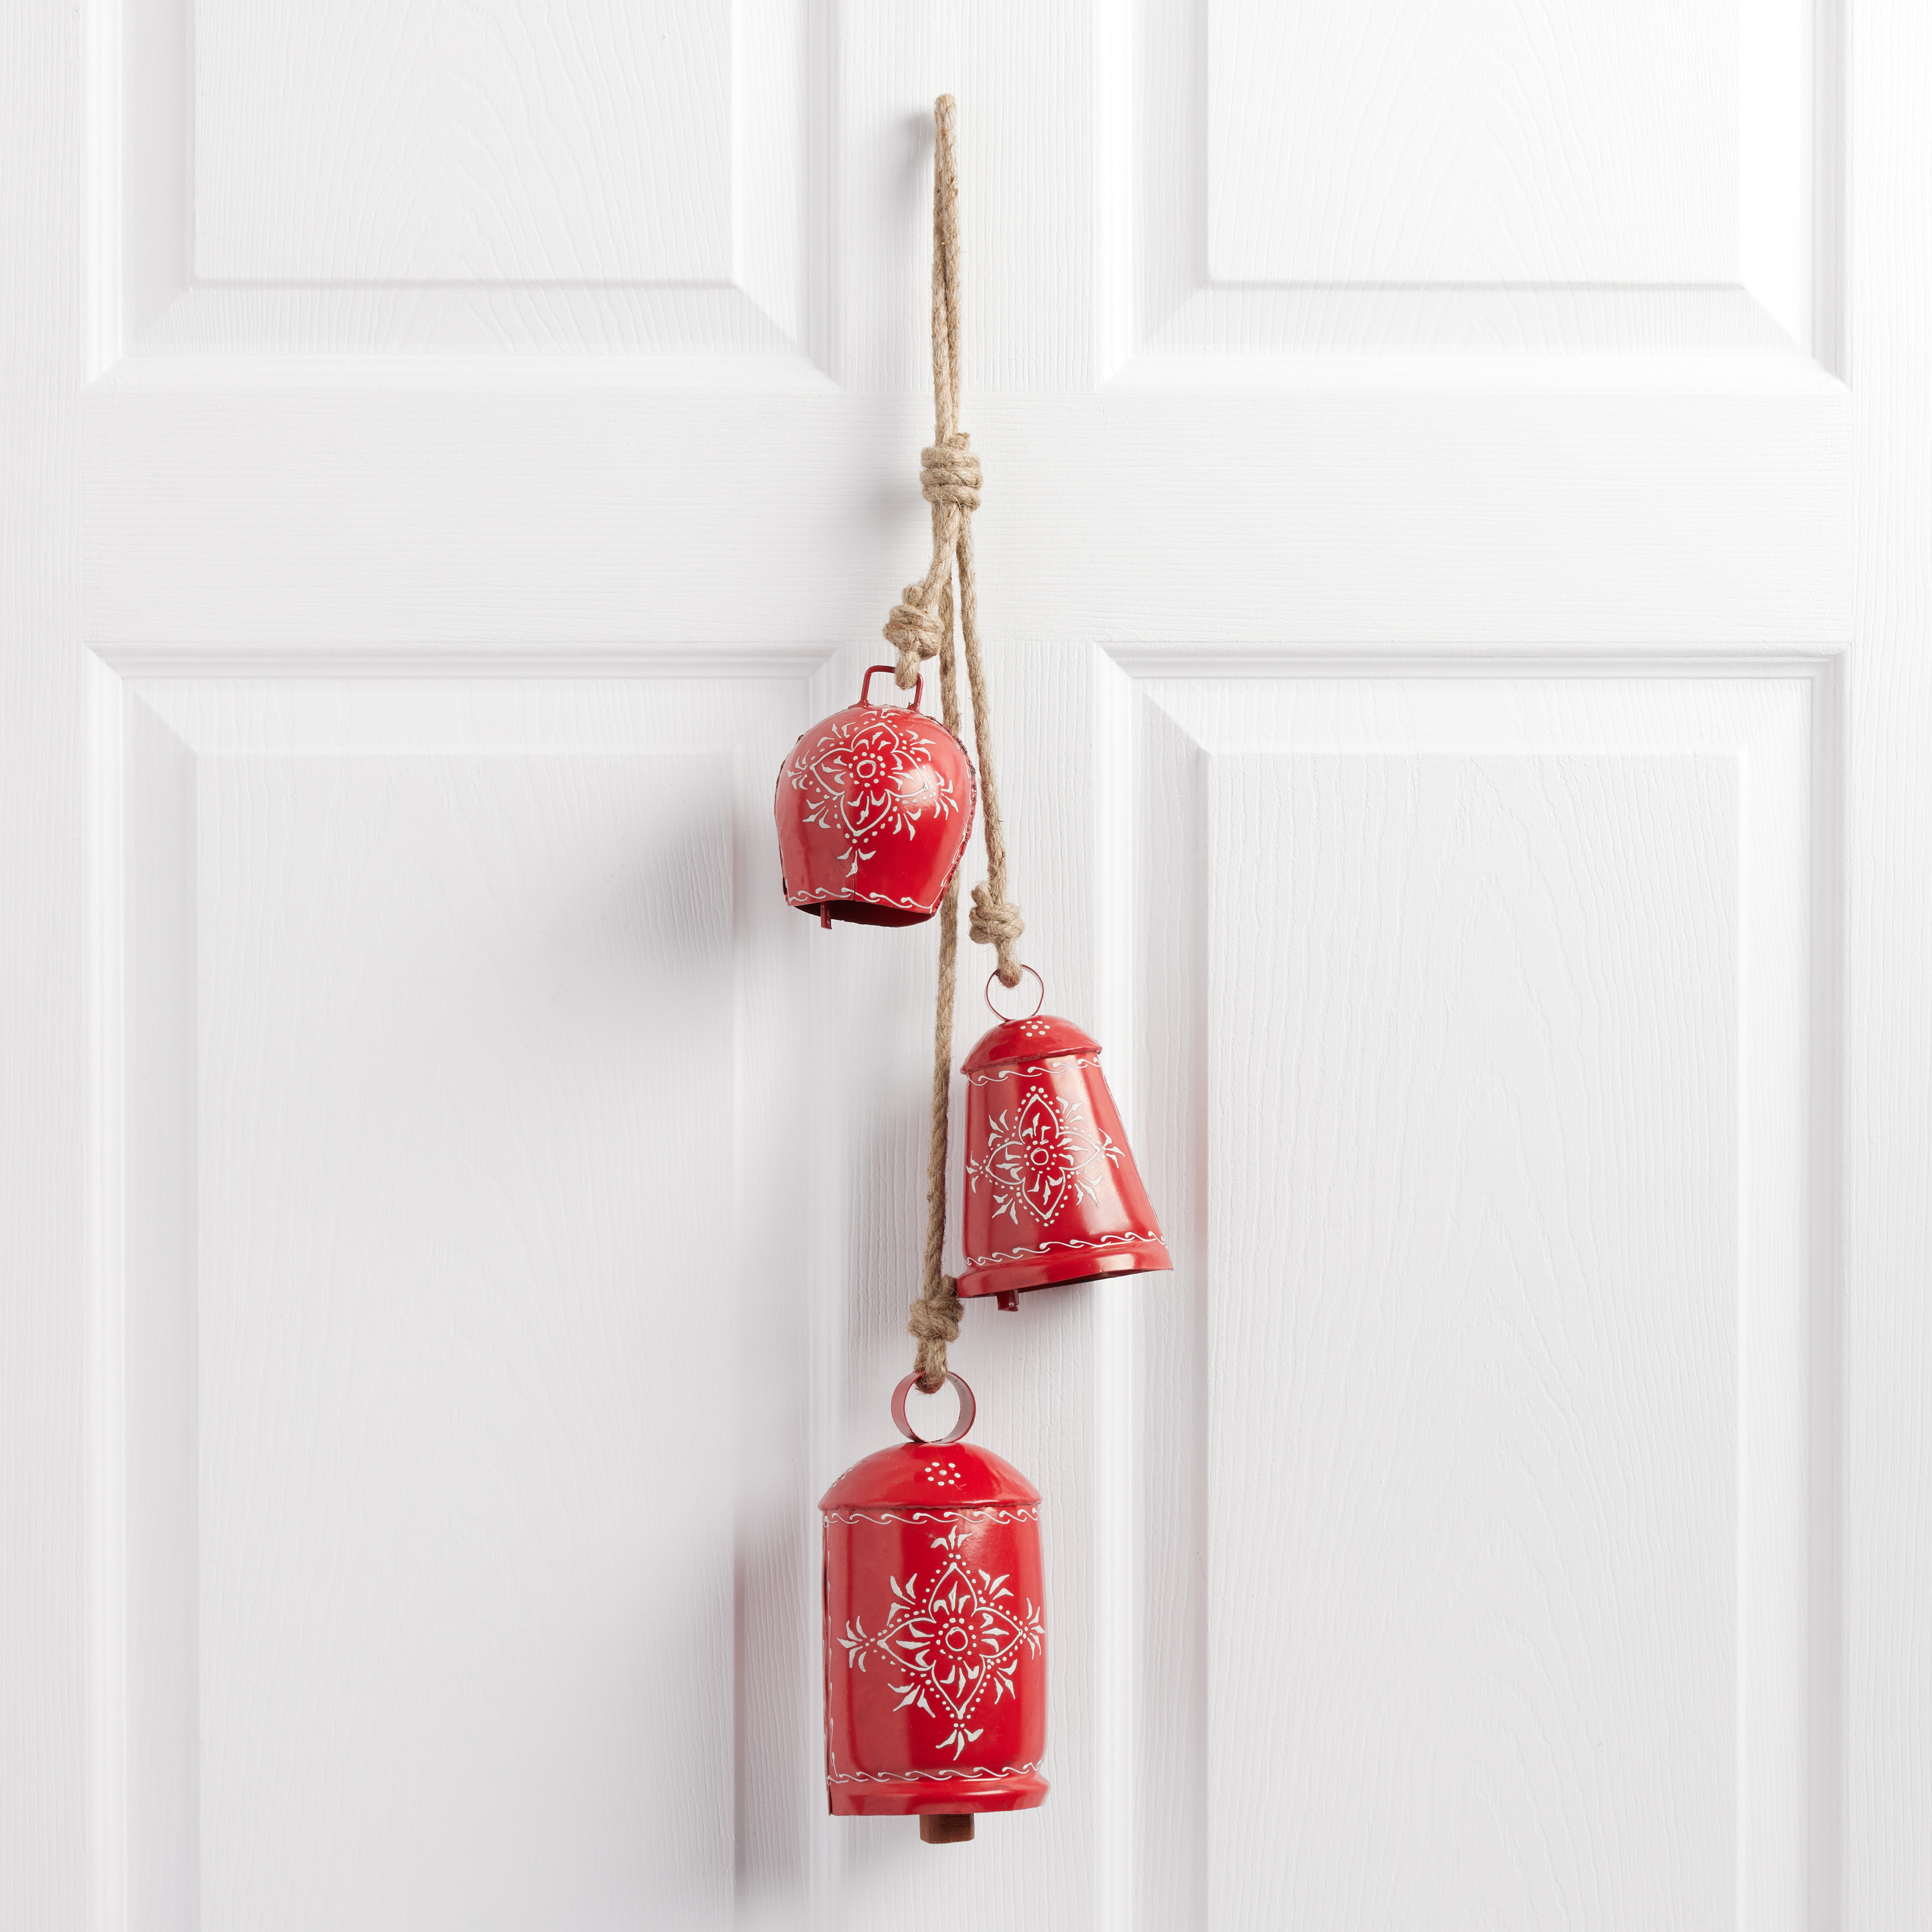 Large Red Metal Christmas Bells in Vintage Farmhouse Style, Set of